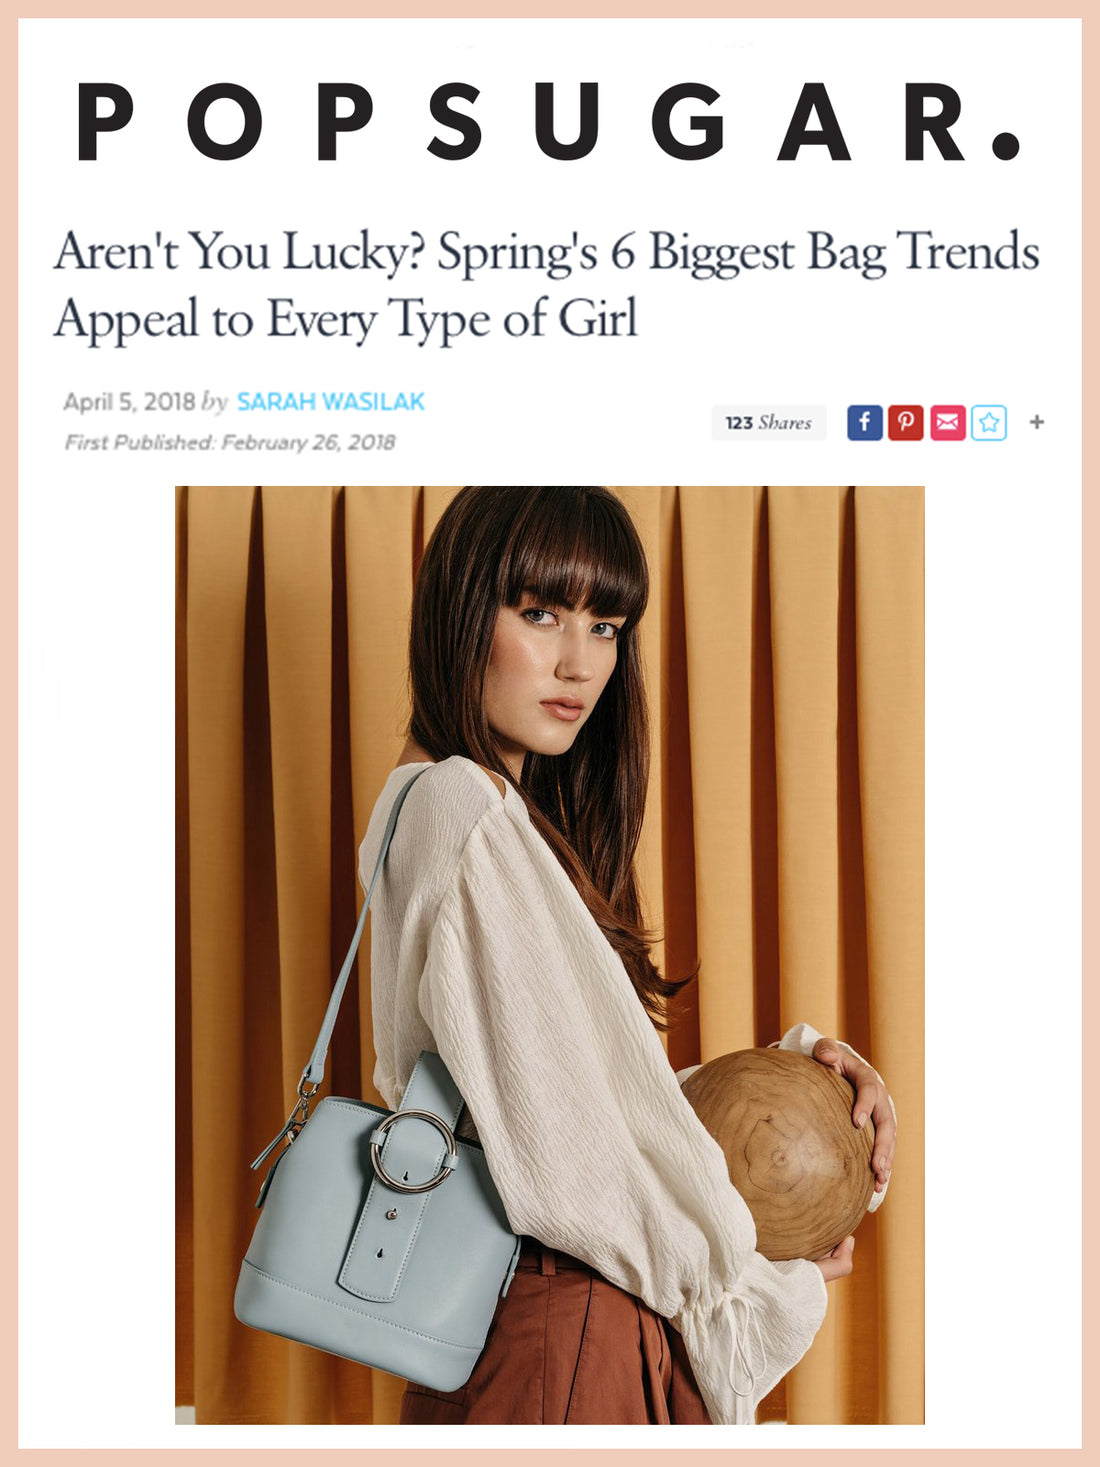 POPSUGAR, Aren't You Lucky? Spring's 6 Biggest Bag Trends Appeal to Every Type of Girl